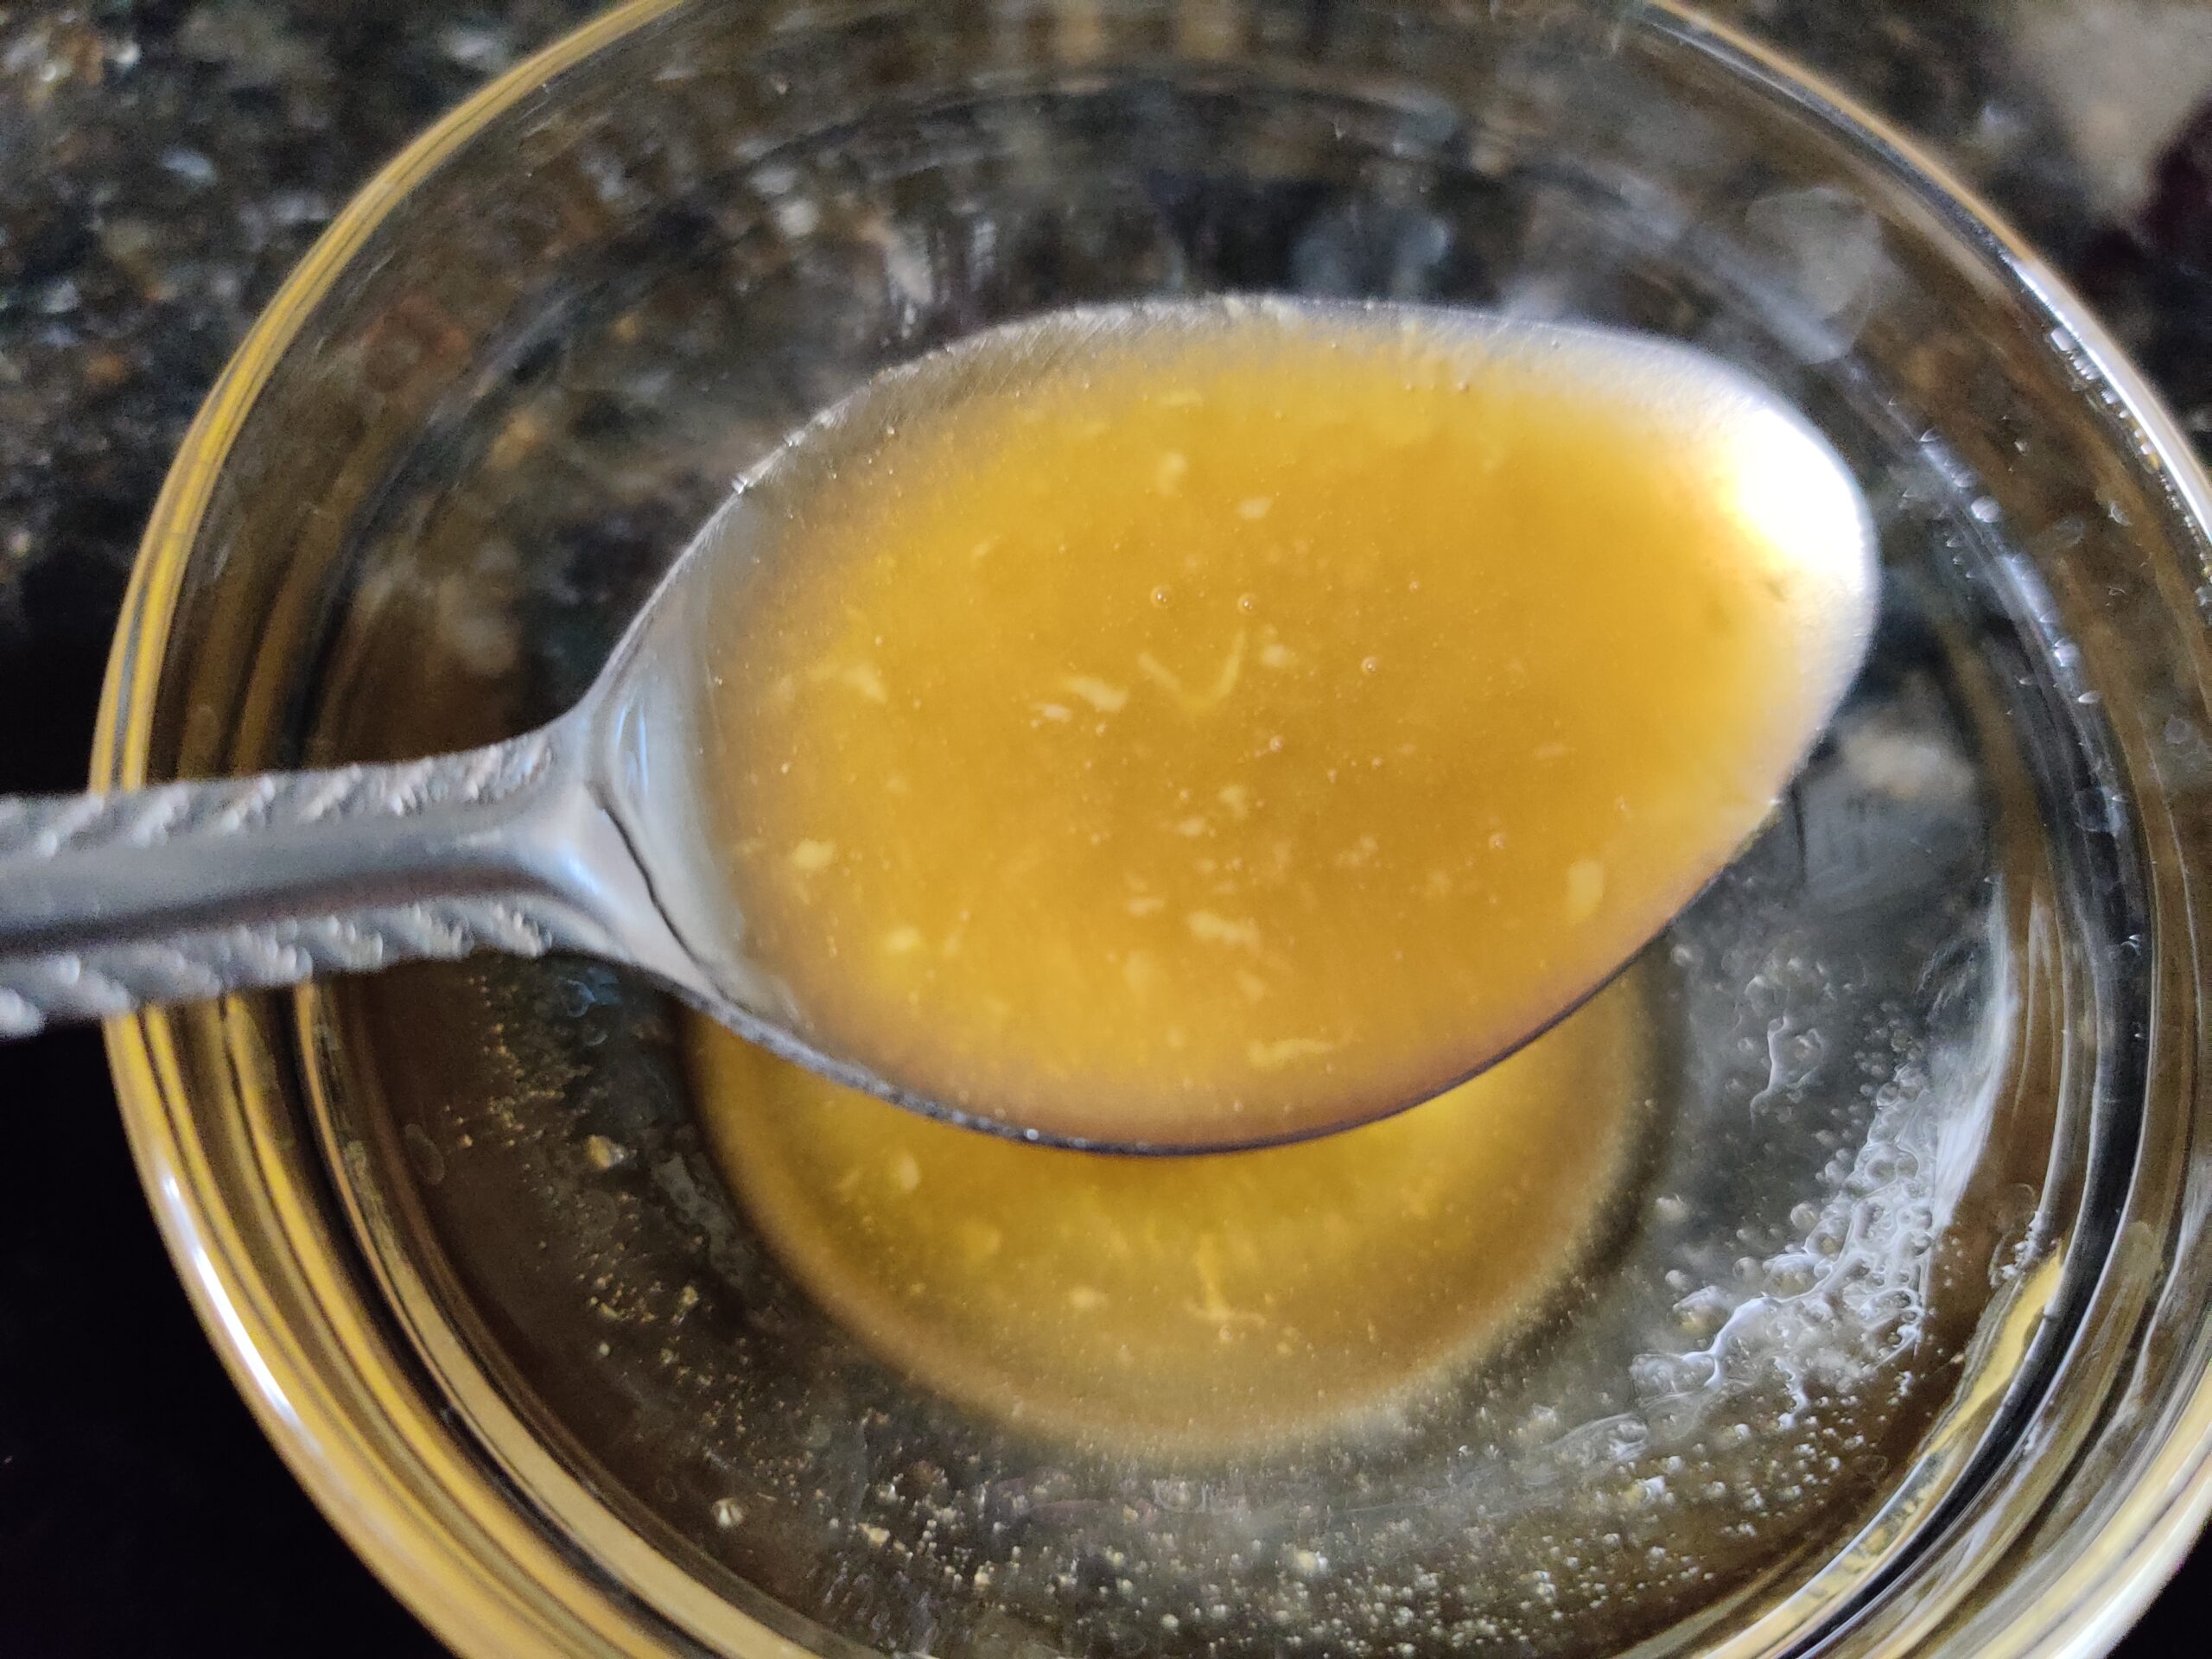 A Wonderfully Effective Homemade Remedy for Sore throat